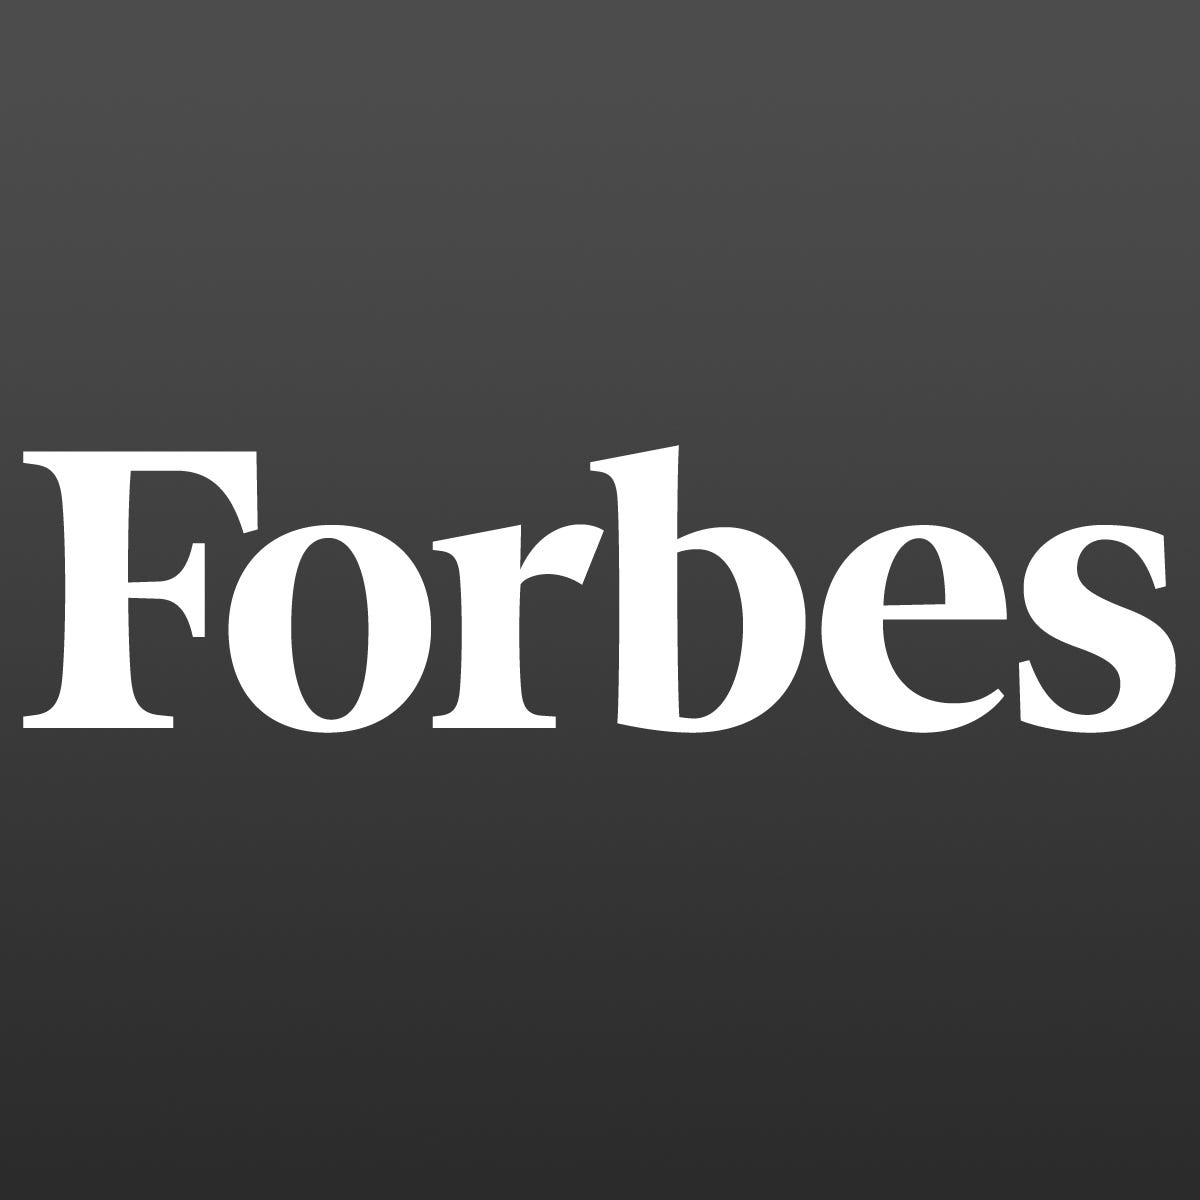 logo that reads "Forbes"